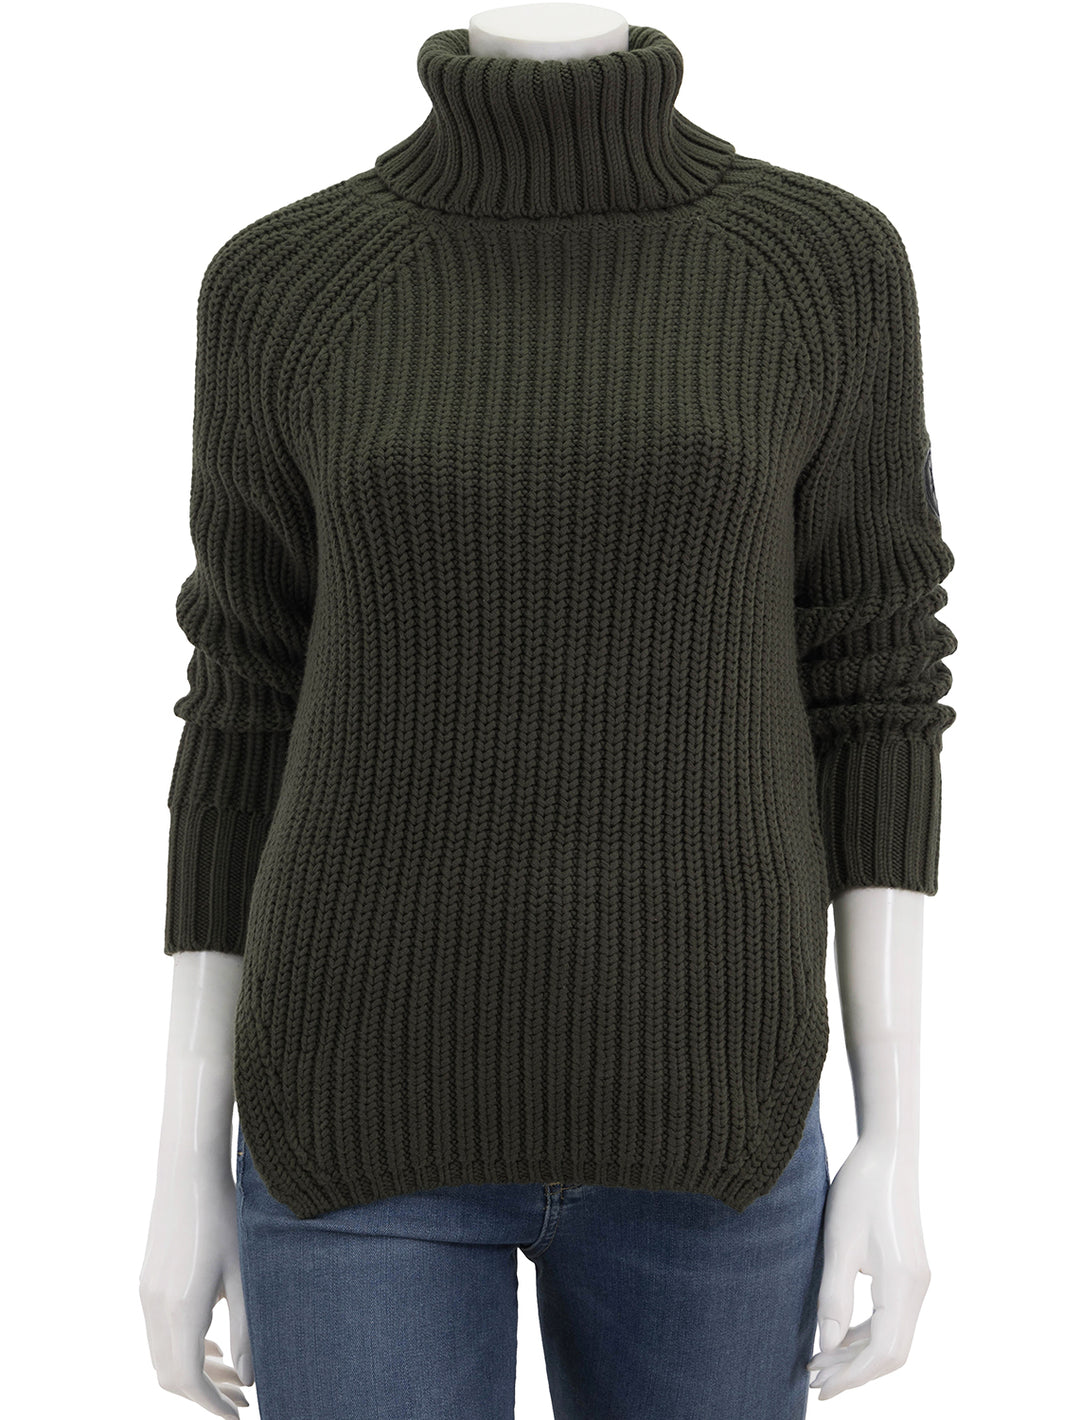 Front view of Alp N Rock's simone sweater in olive.